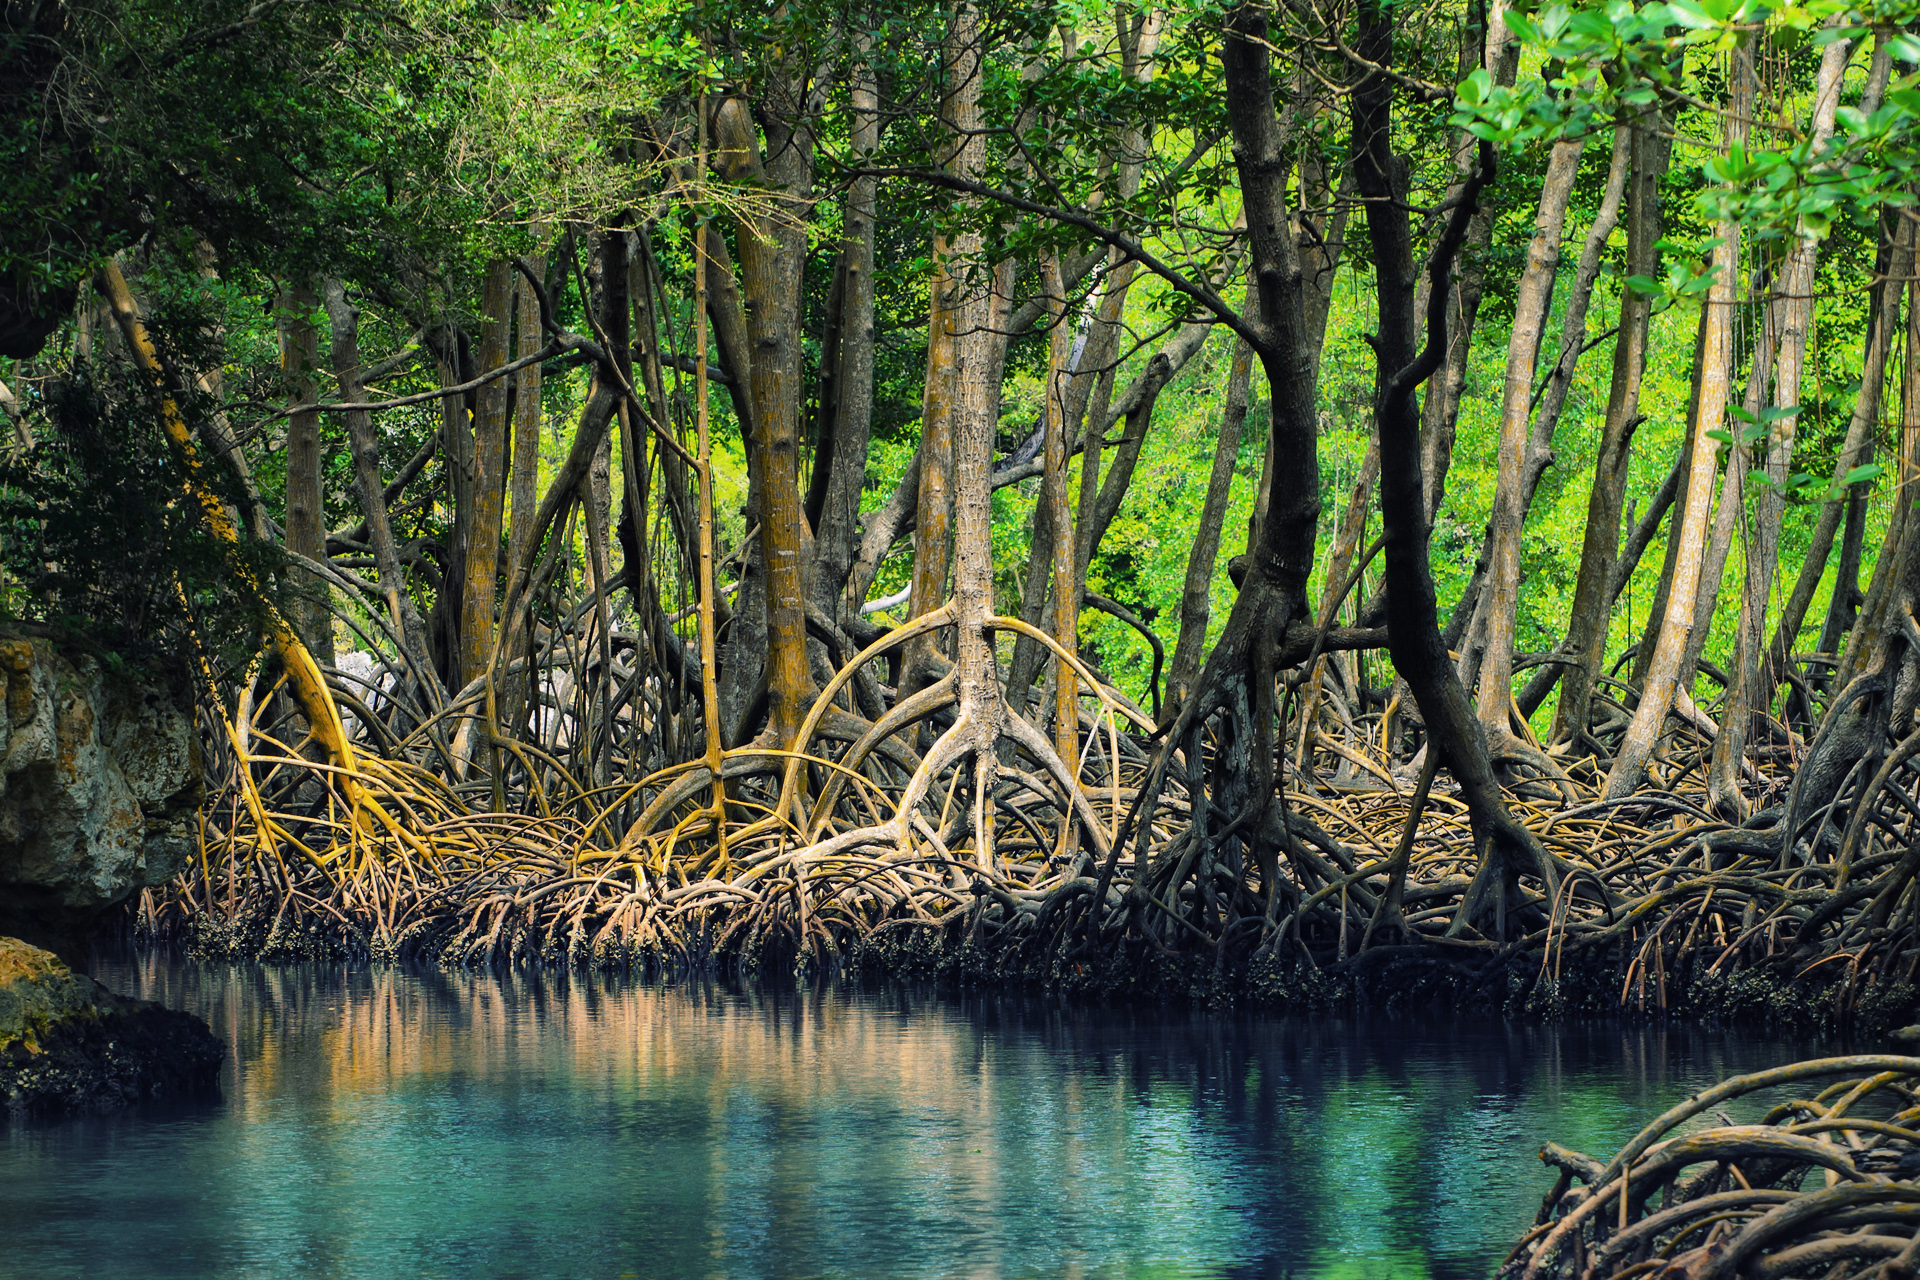 Dominican_republic_Los_Haitises_mangroves-deleted-3a0414f2fa1a4b1def31dcbed956120f